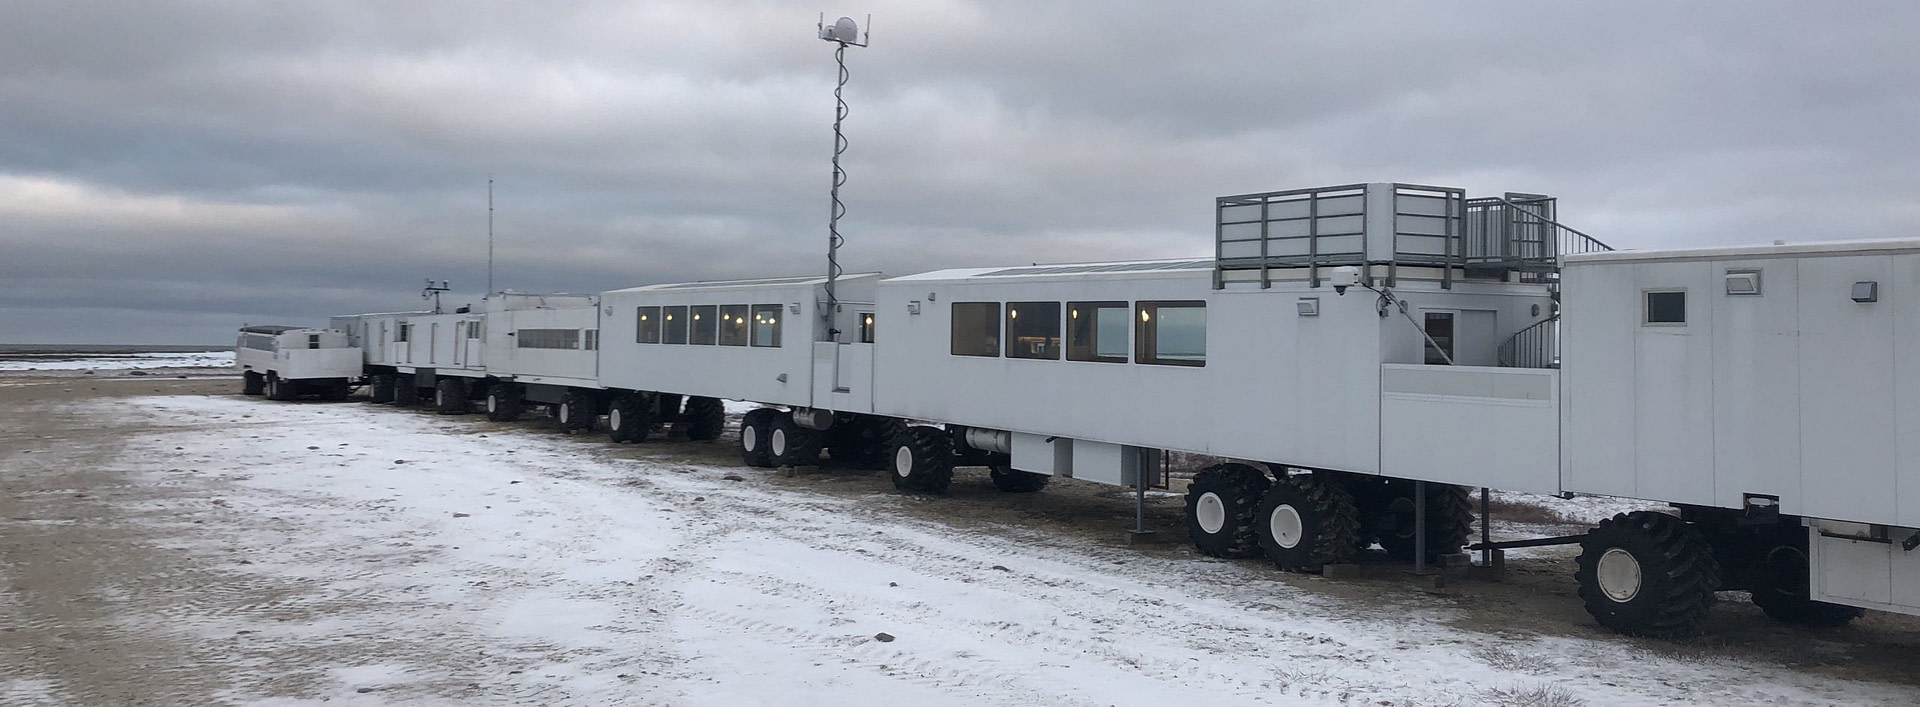 XRain Self Wiping Camera Housing System Installed On The Tundra Buggy Lodge Overlooking Polar Bears In Wapusk National Park In Churchill Manitoba Canada 